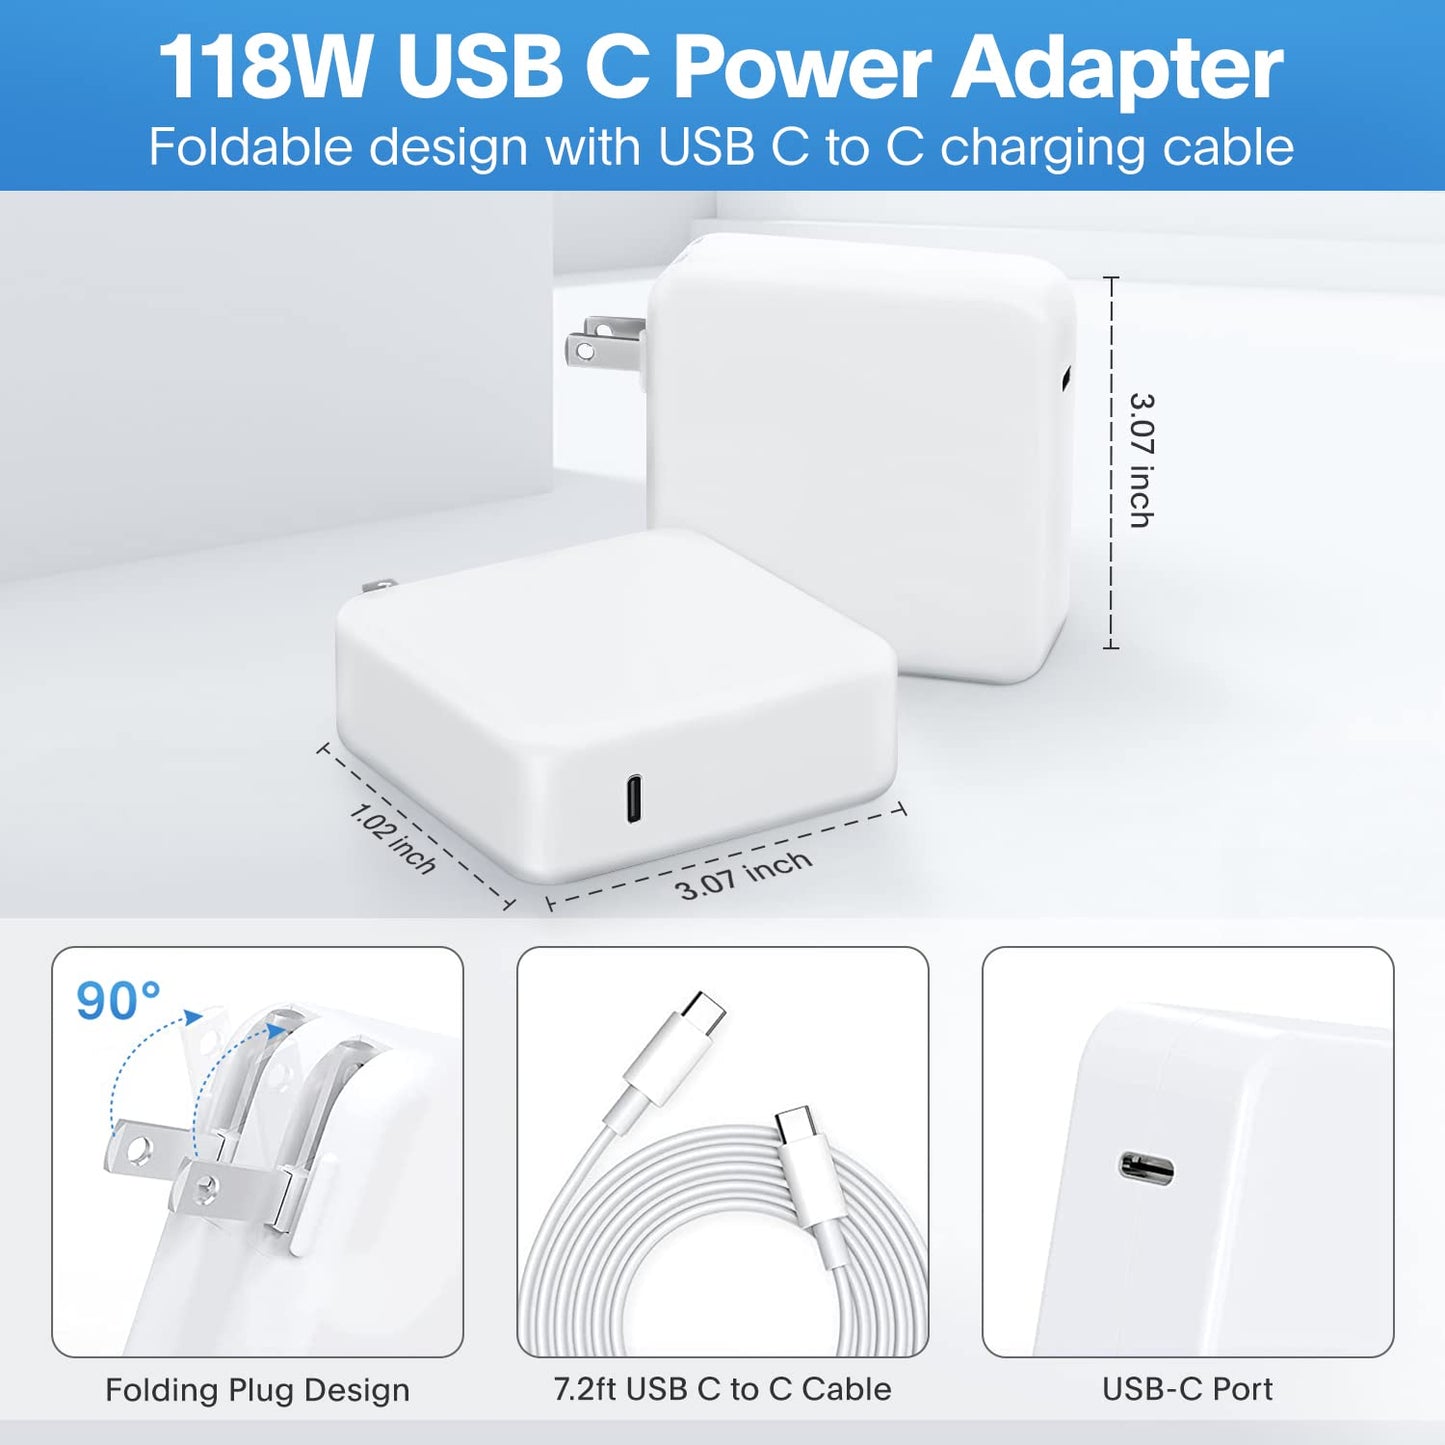 Mac Book Pro Charger - 118W USB C Charger Fast Charger for USB C Port MacBook pro/Air, ipad Pro, Samsung Galaxy and All USB C Device, Include Charge Cable（7.2ft/2.2m）